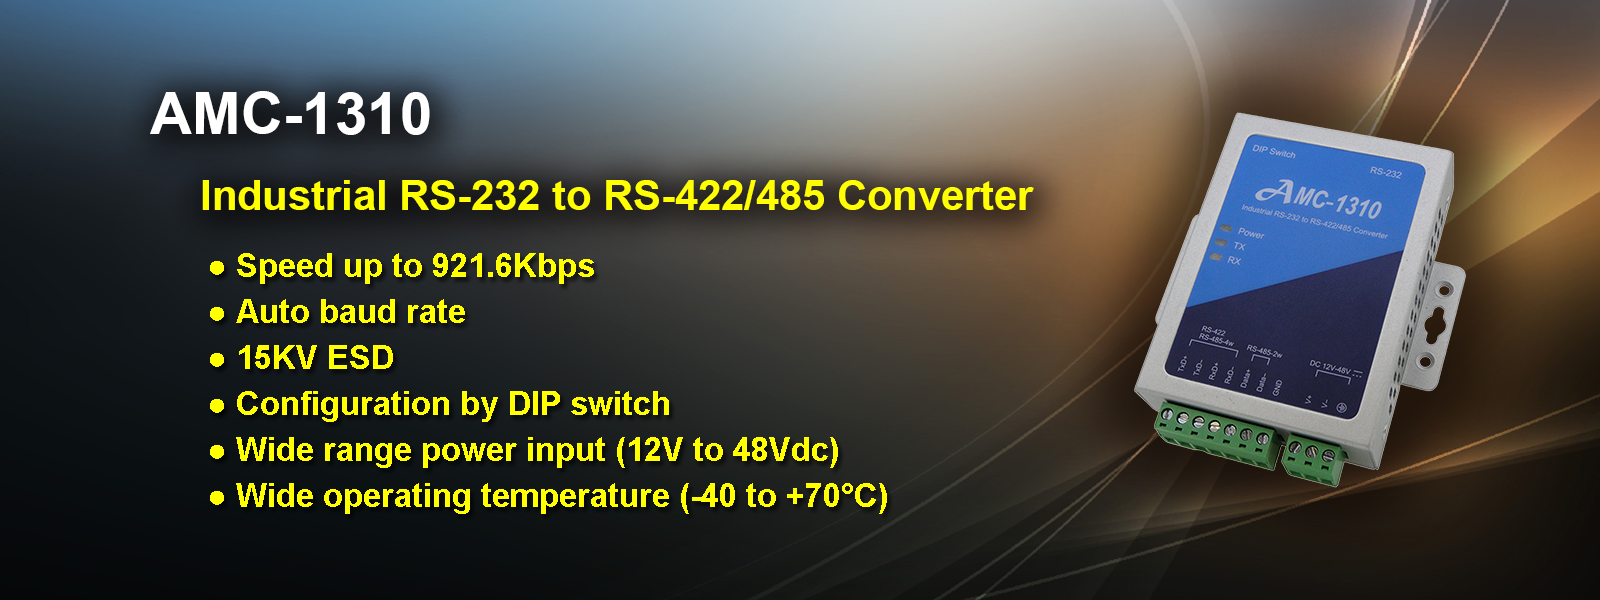 RS-232 to RS-422/485